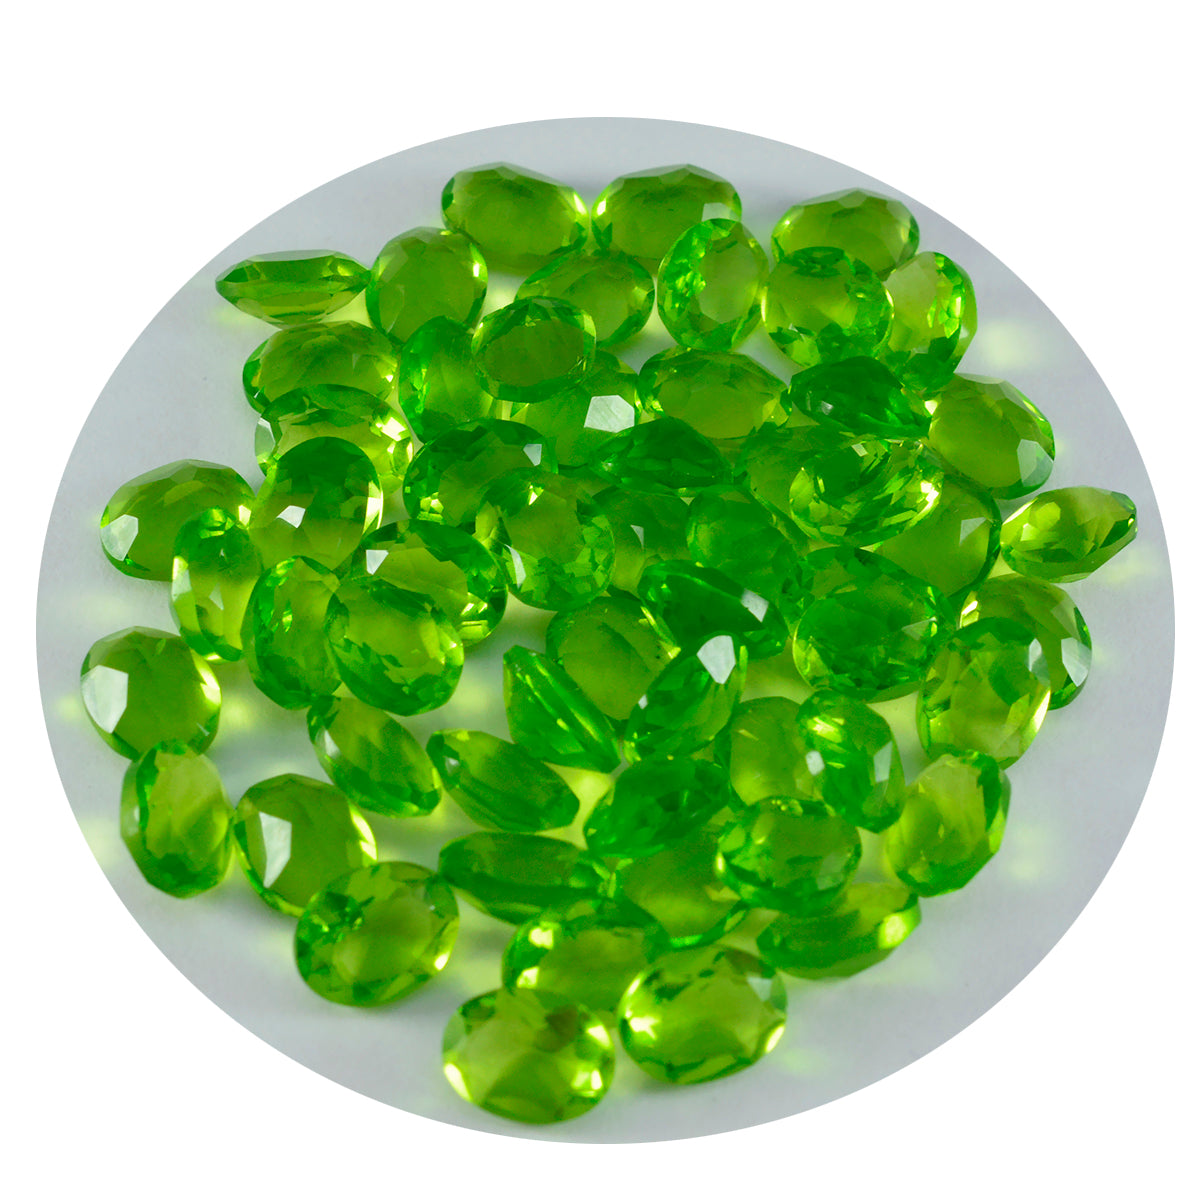 Riyogems 1PC Green Peridot CZ Faceted 5x7 mm Oval Shape handsome Quality Loose Gems